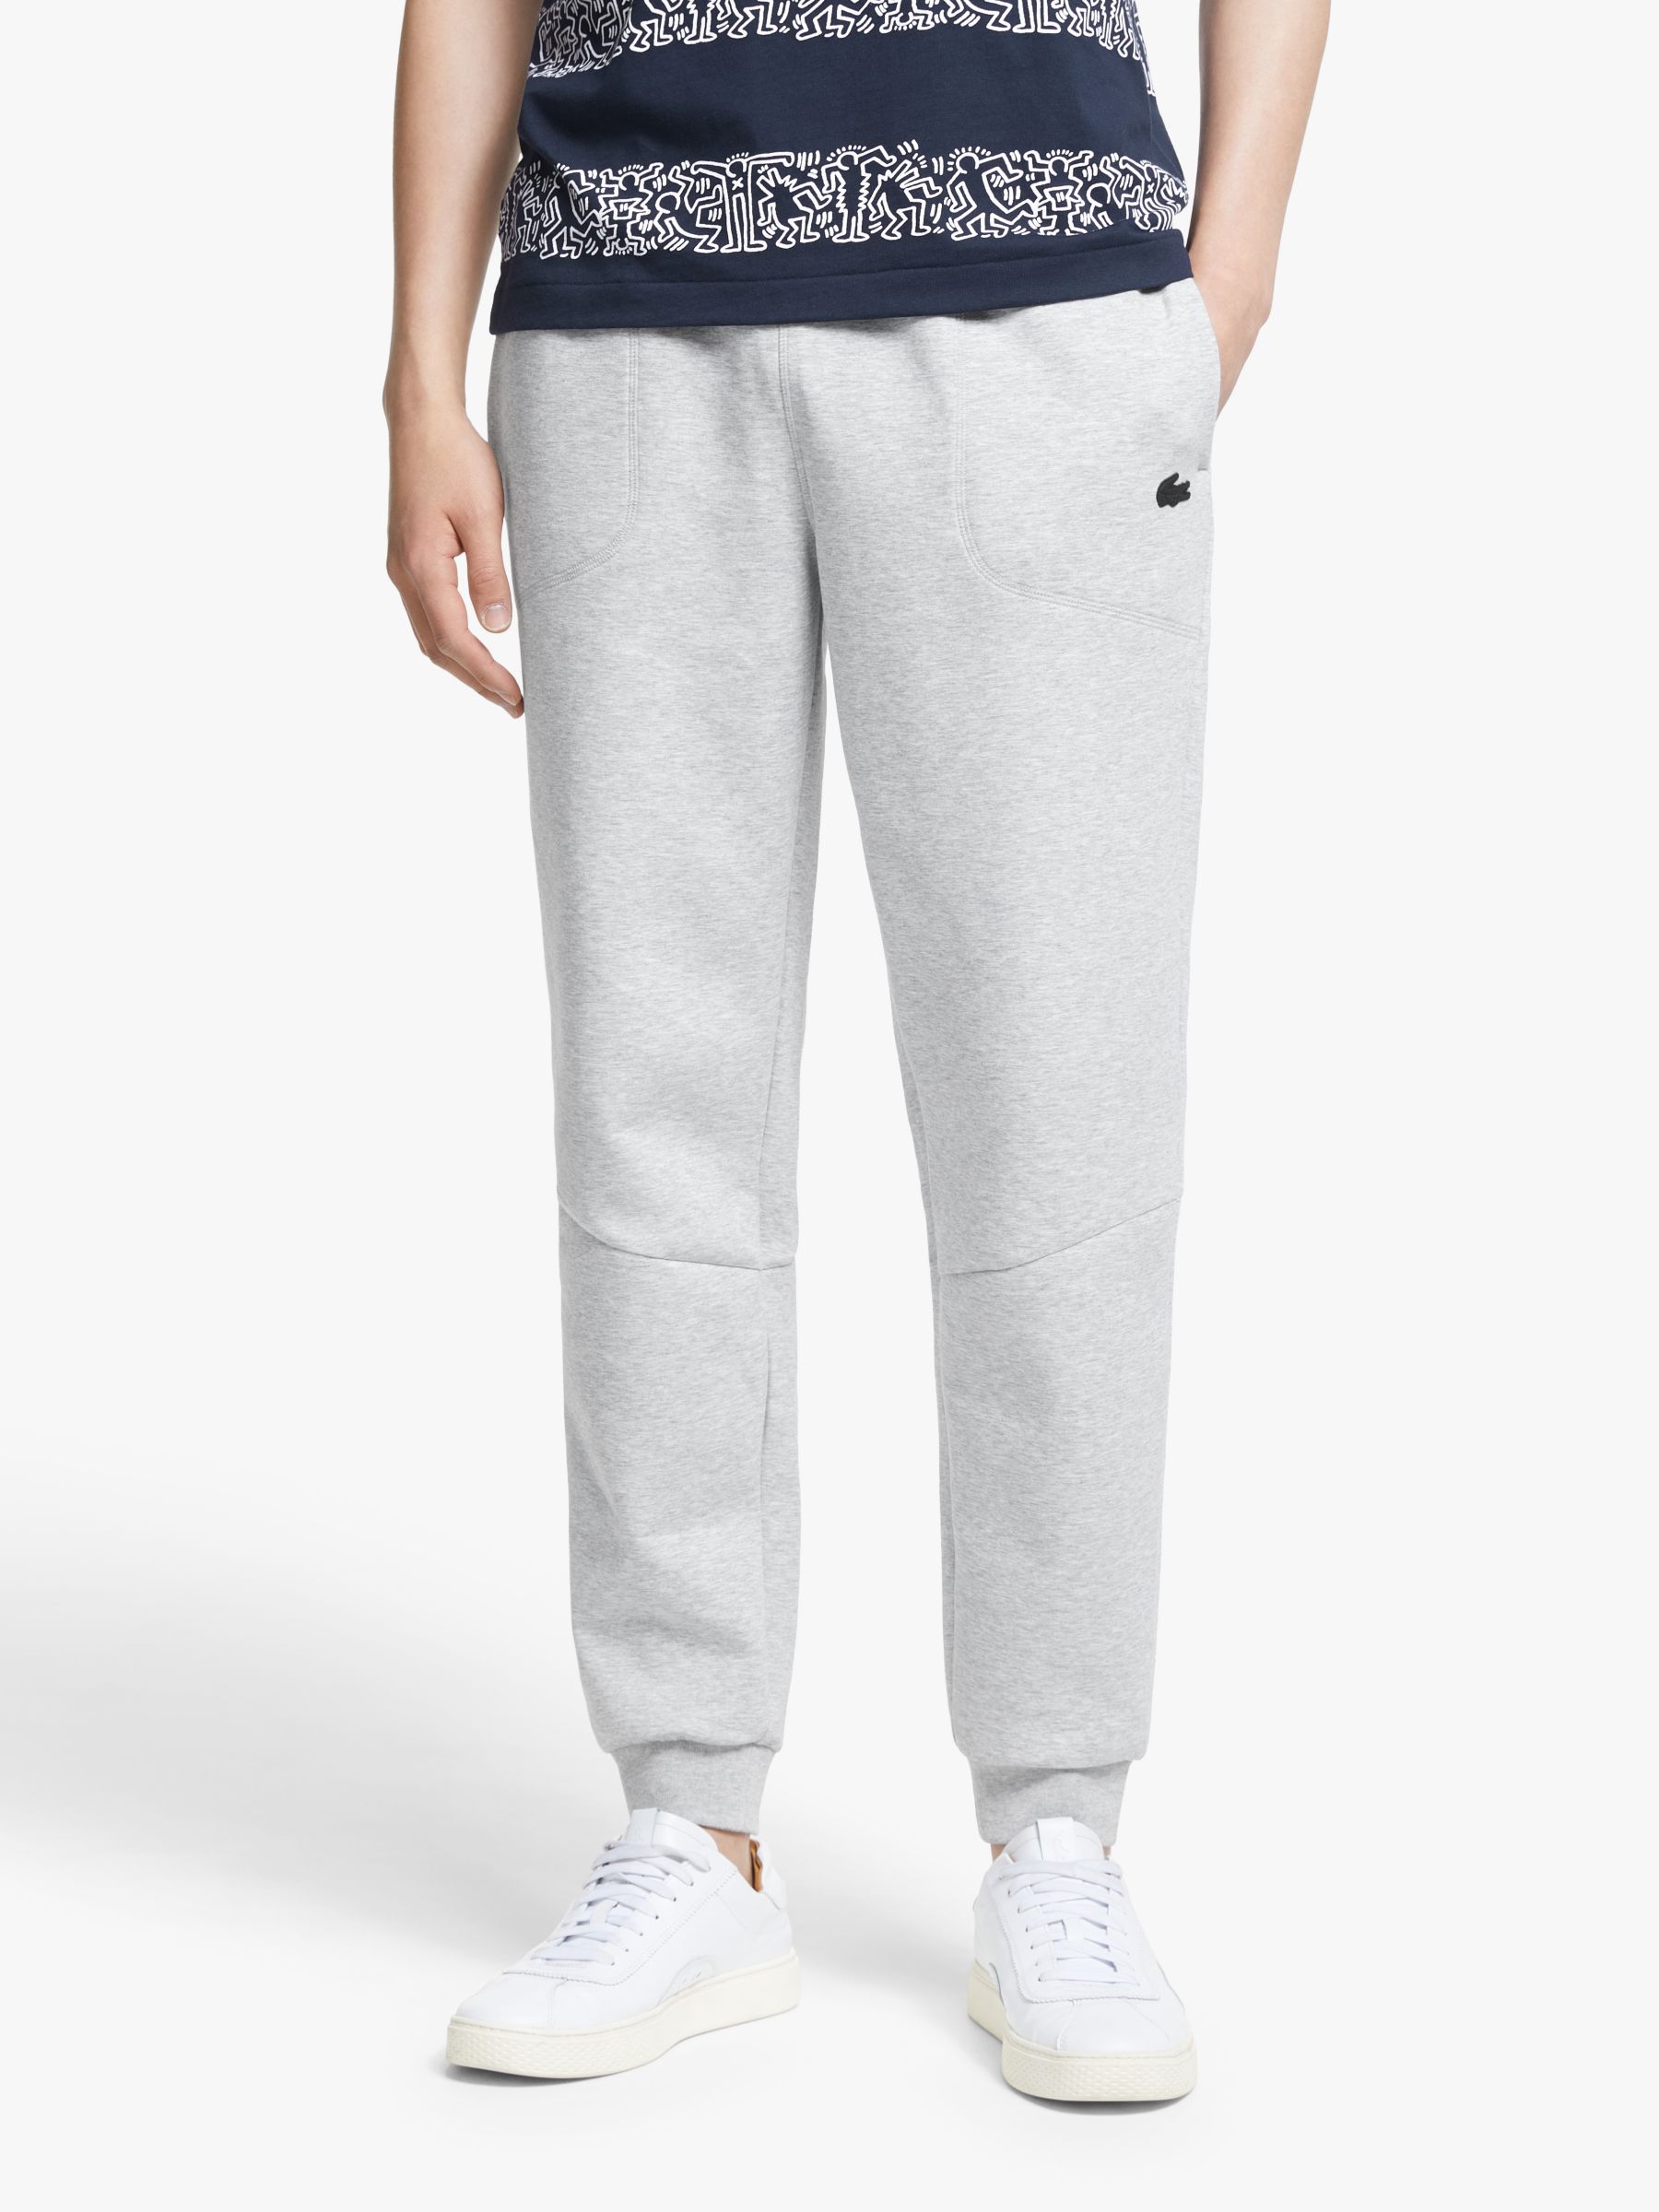 lacoste tracksuit trousers